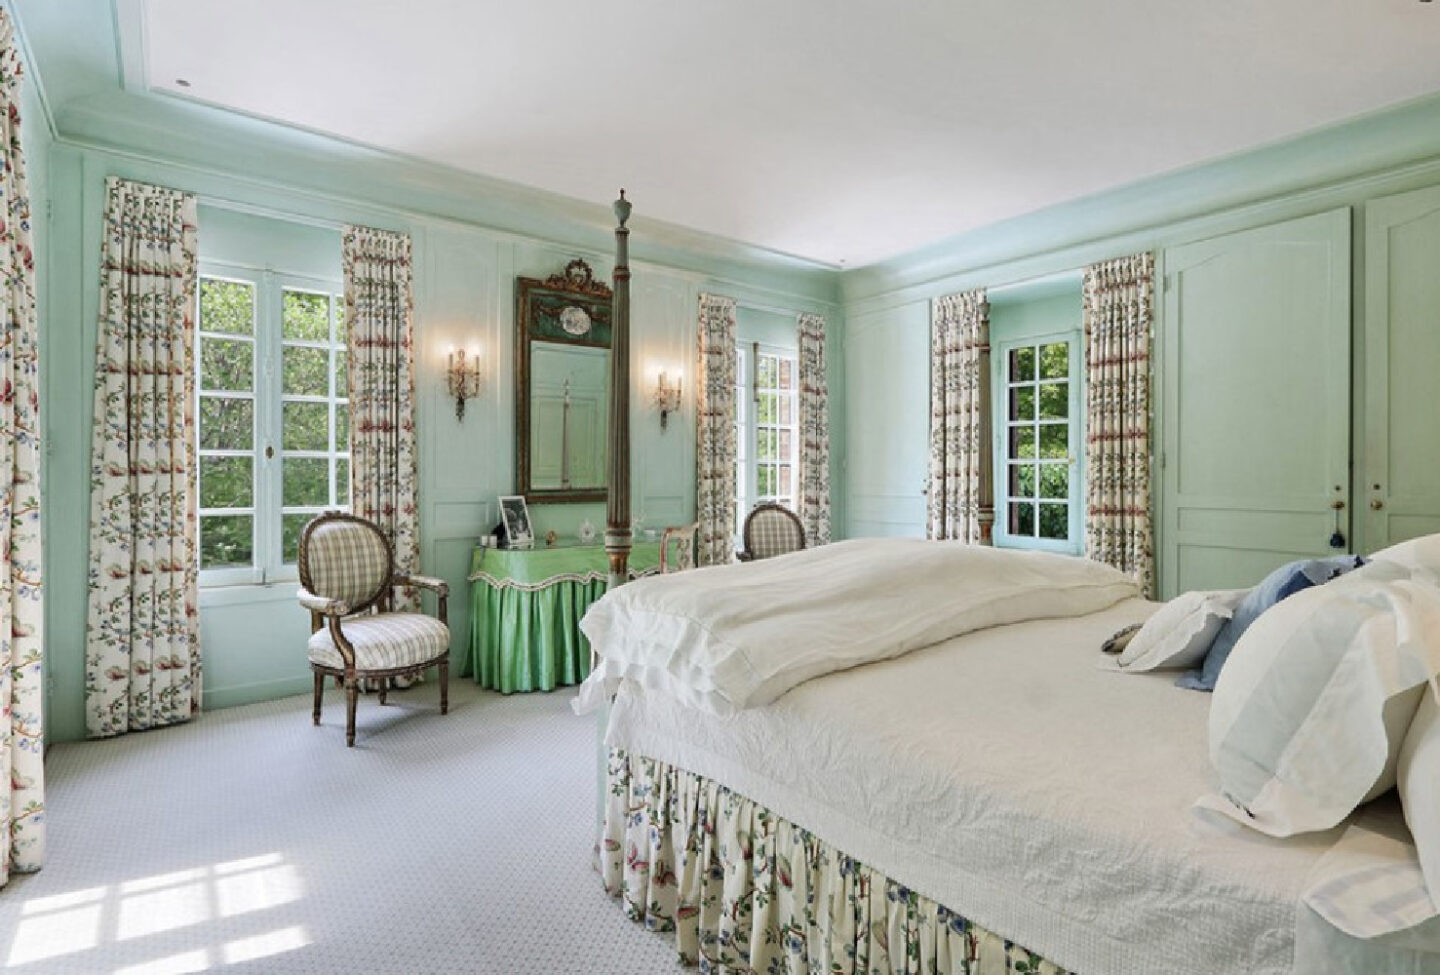 Delicious pastel French green in a bedroom. David Adler La Lanterne Mansion is a 1922 historic home in Lake Bluff with French inspired architecture and interiors.